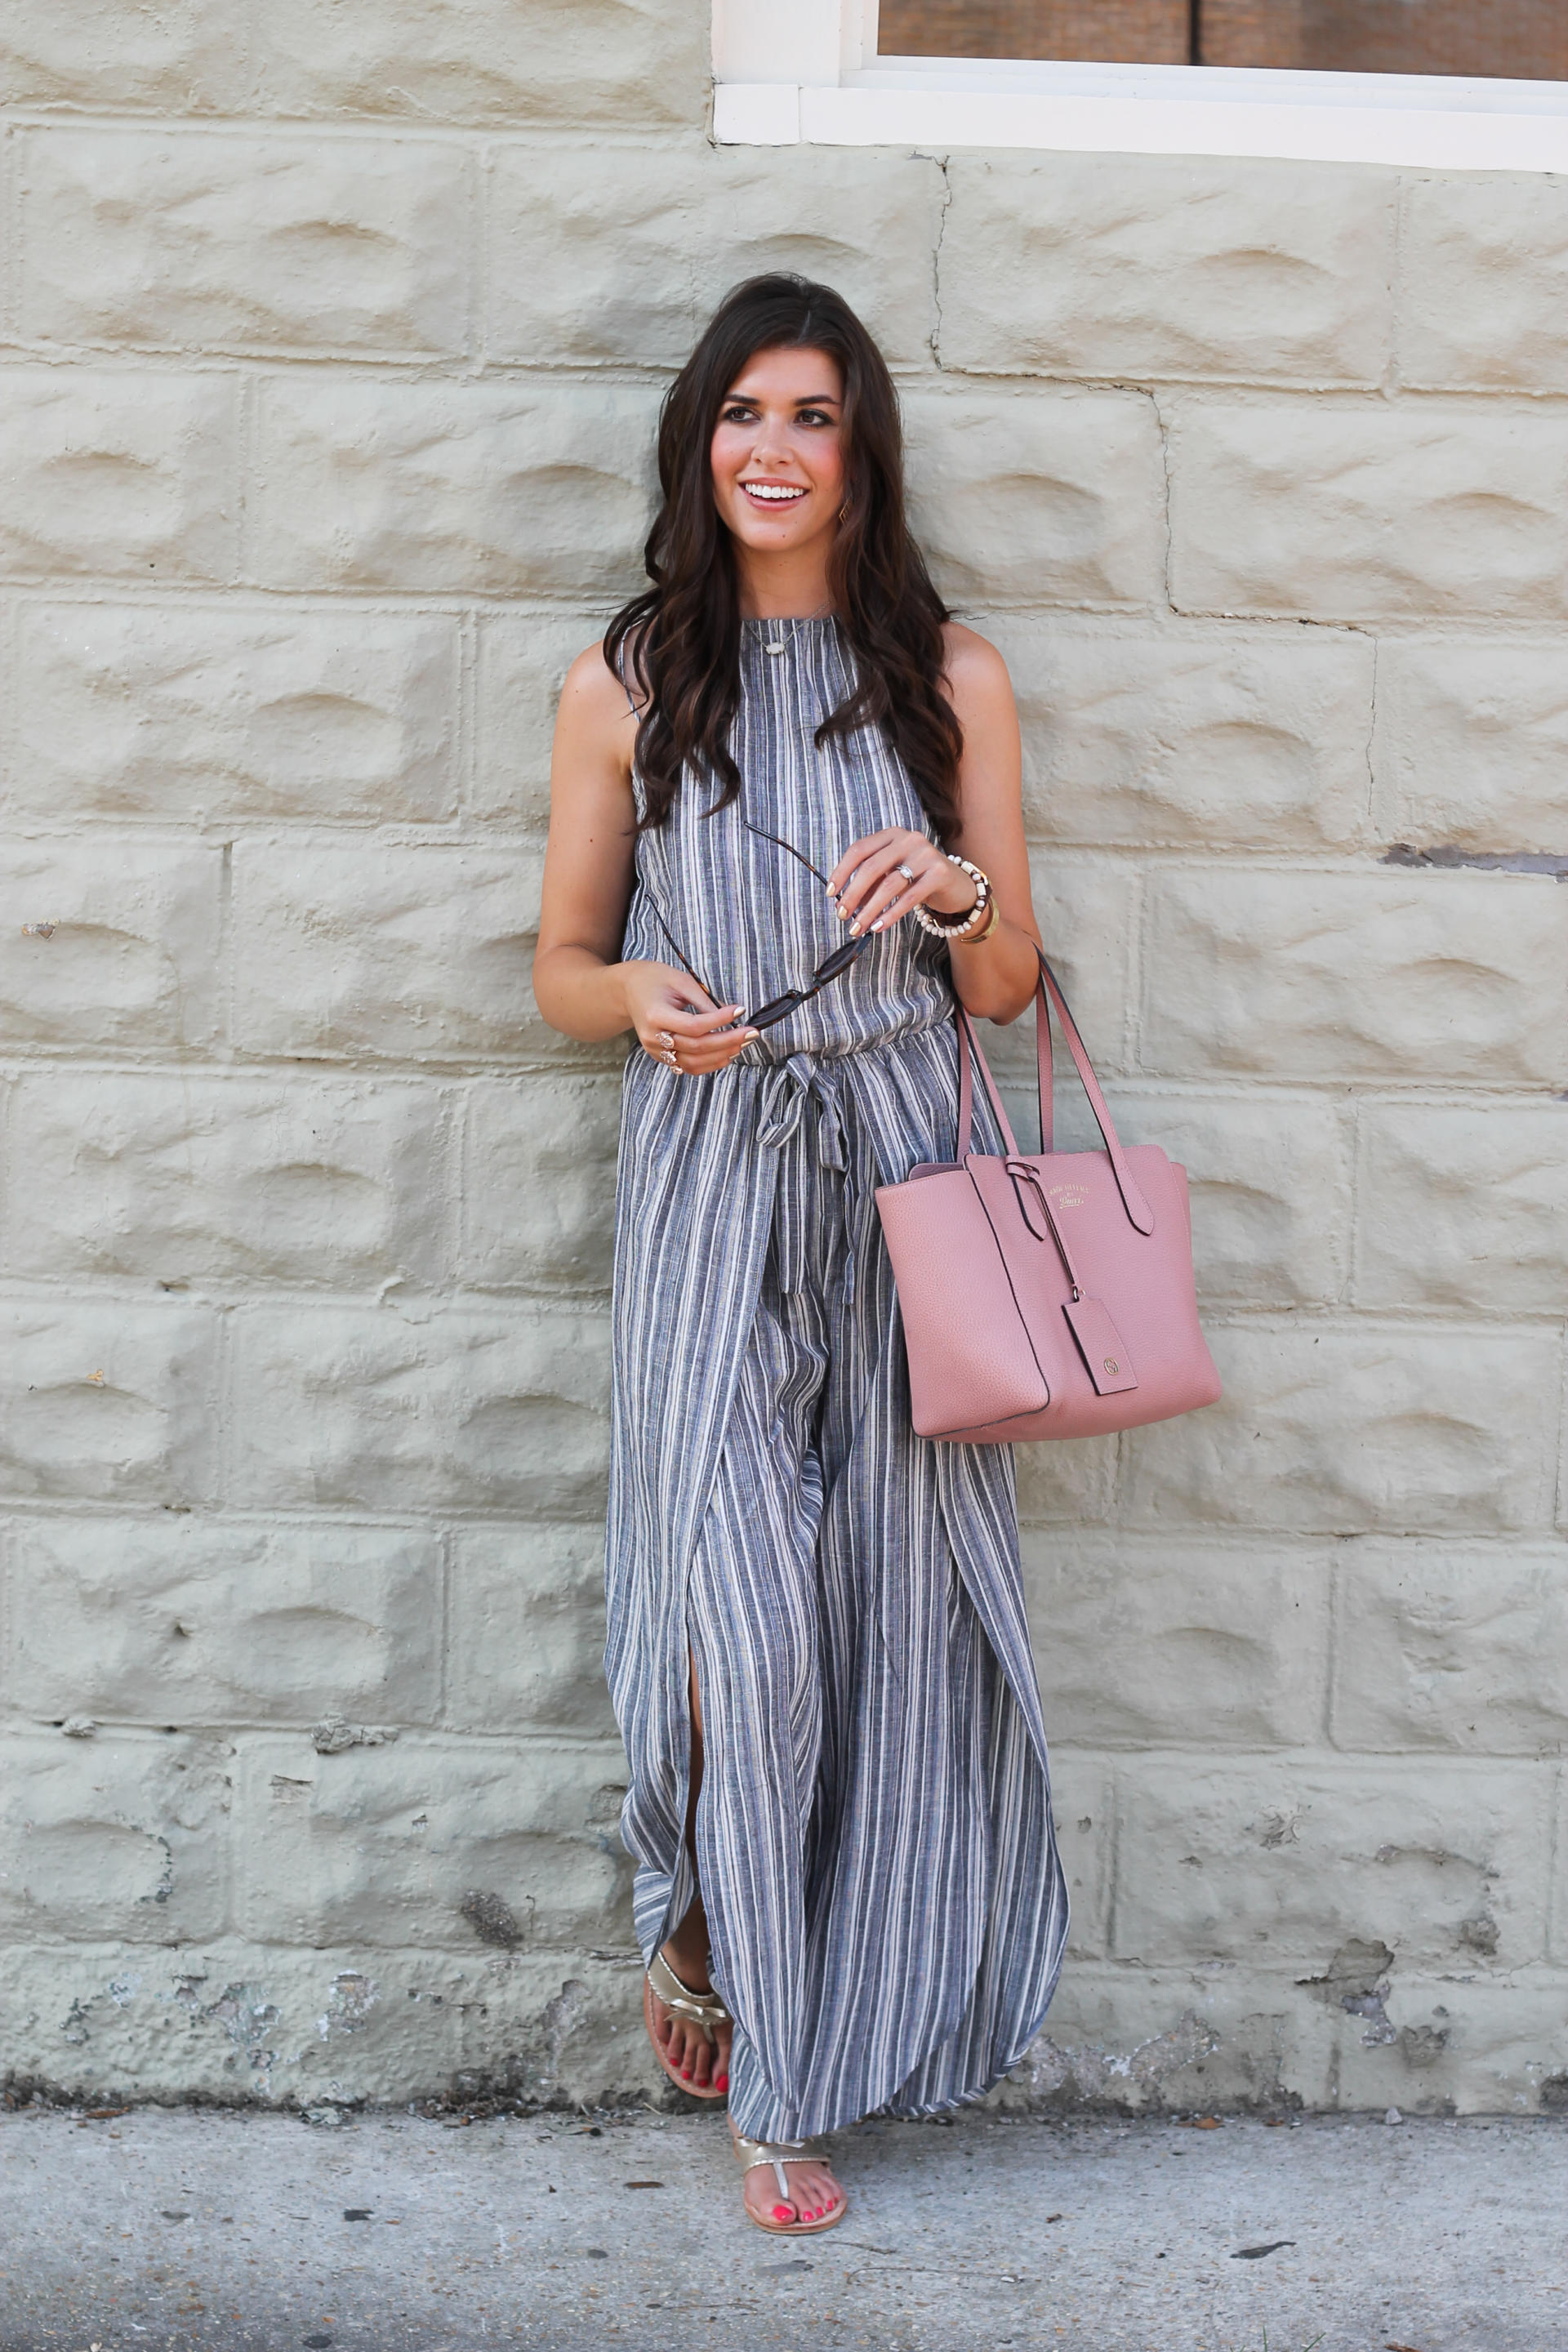 A Striped Jumpsuit & $1000 Nordstrom Gift Card Giveaway - A Striped Jumpsuit by New York fashion blogger Style Waltz